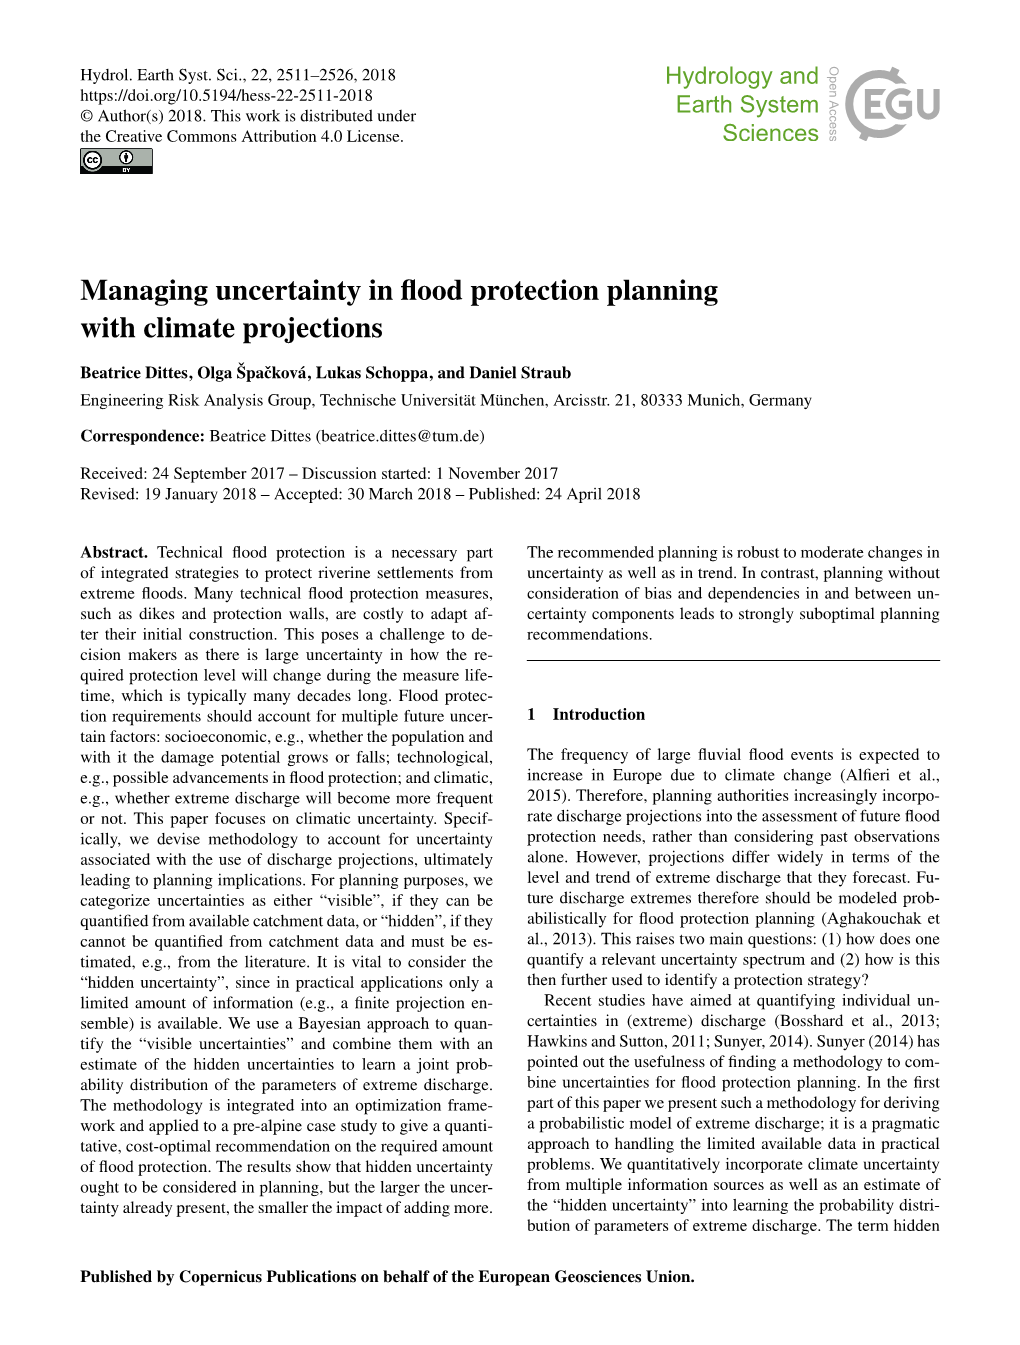 Managing Uncertainty in Flood Protection Planning with Climate